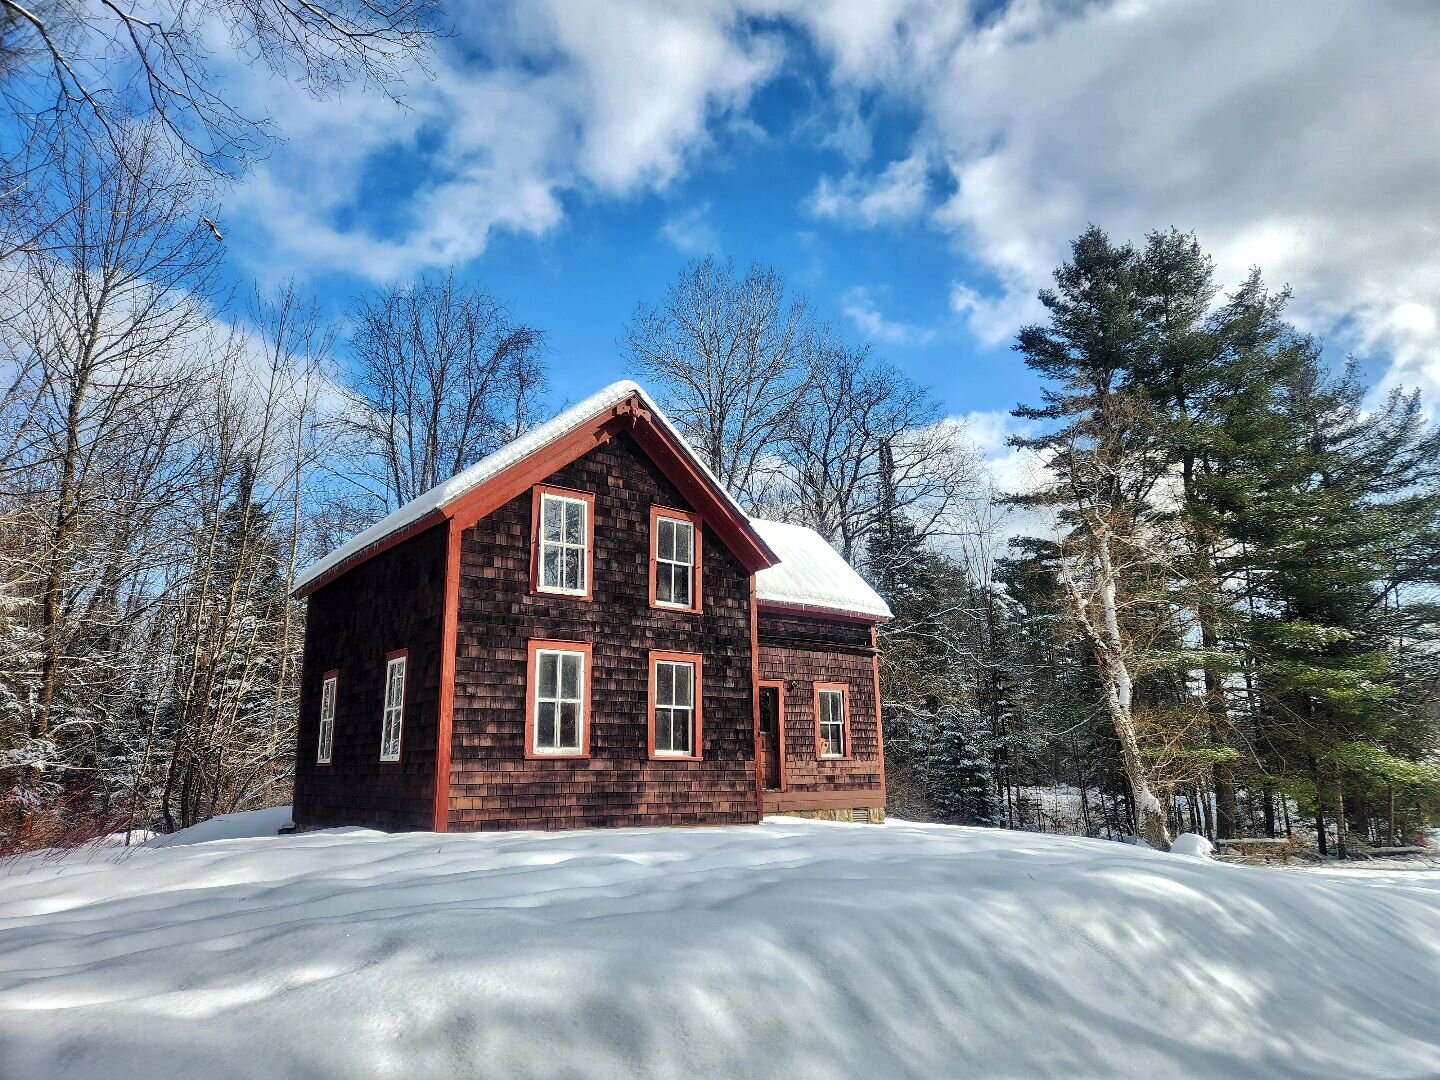 It is an unseasonably BEAUTIFUL day in the Adirondacks 😍❤️☀️ the highs today in Newcomb will peak around the low 50s. We have some more winter weather on the way before we officially hit spring, so enjoy this warmth and sun while you can. 

Don't fo